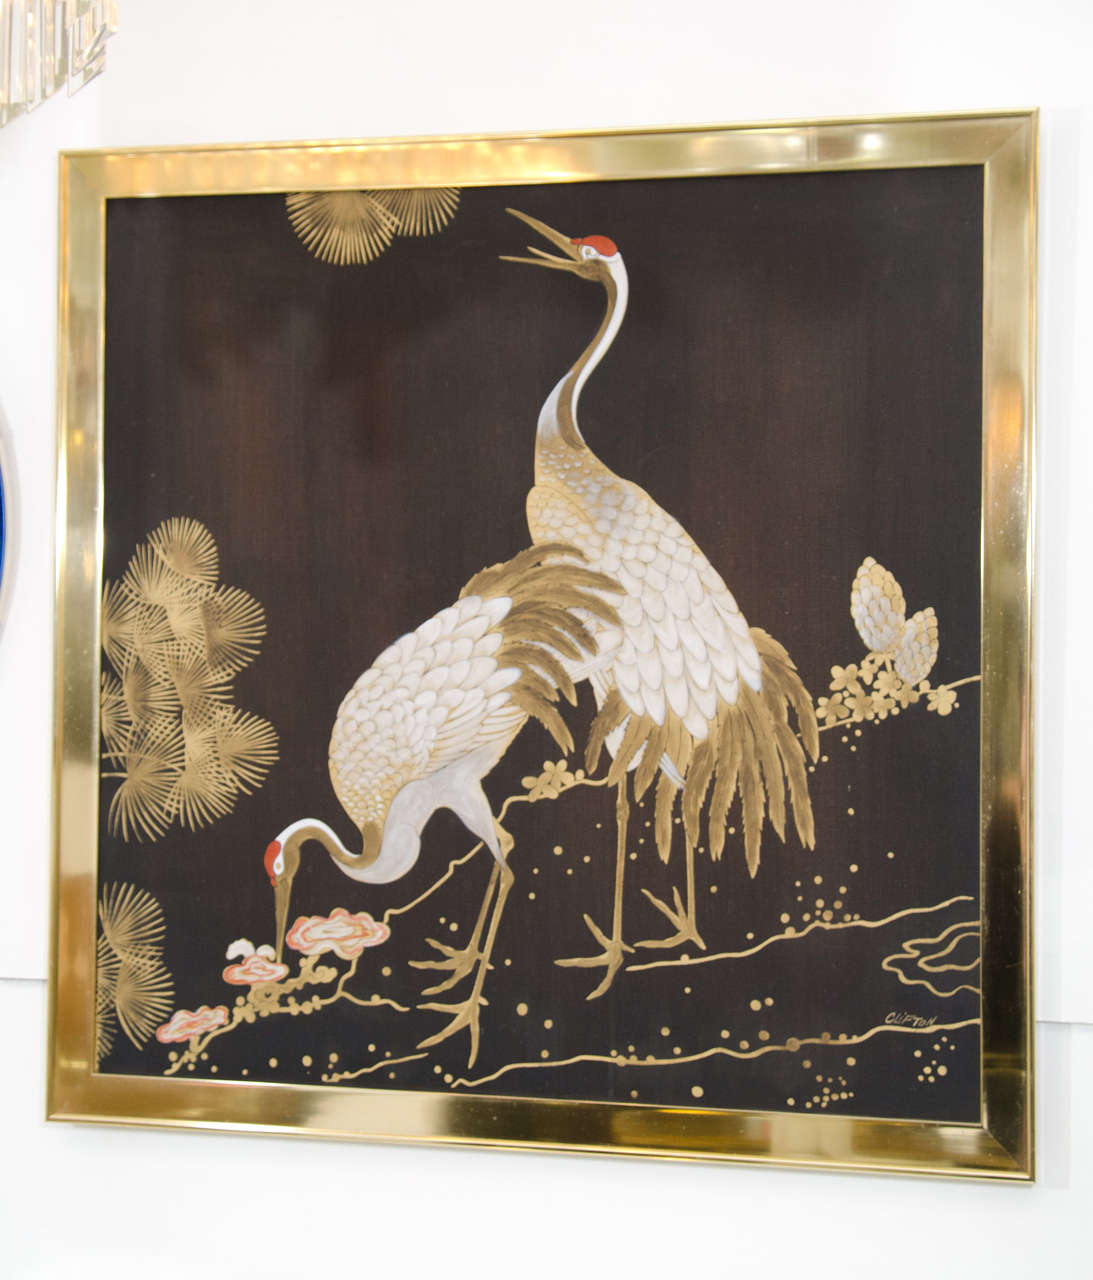 A large vintage acrylic or oil painting of two Heron birds.
Gold brass metal frame over a wood frame. 
Signed 